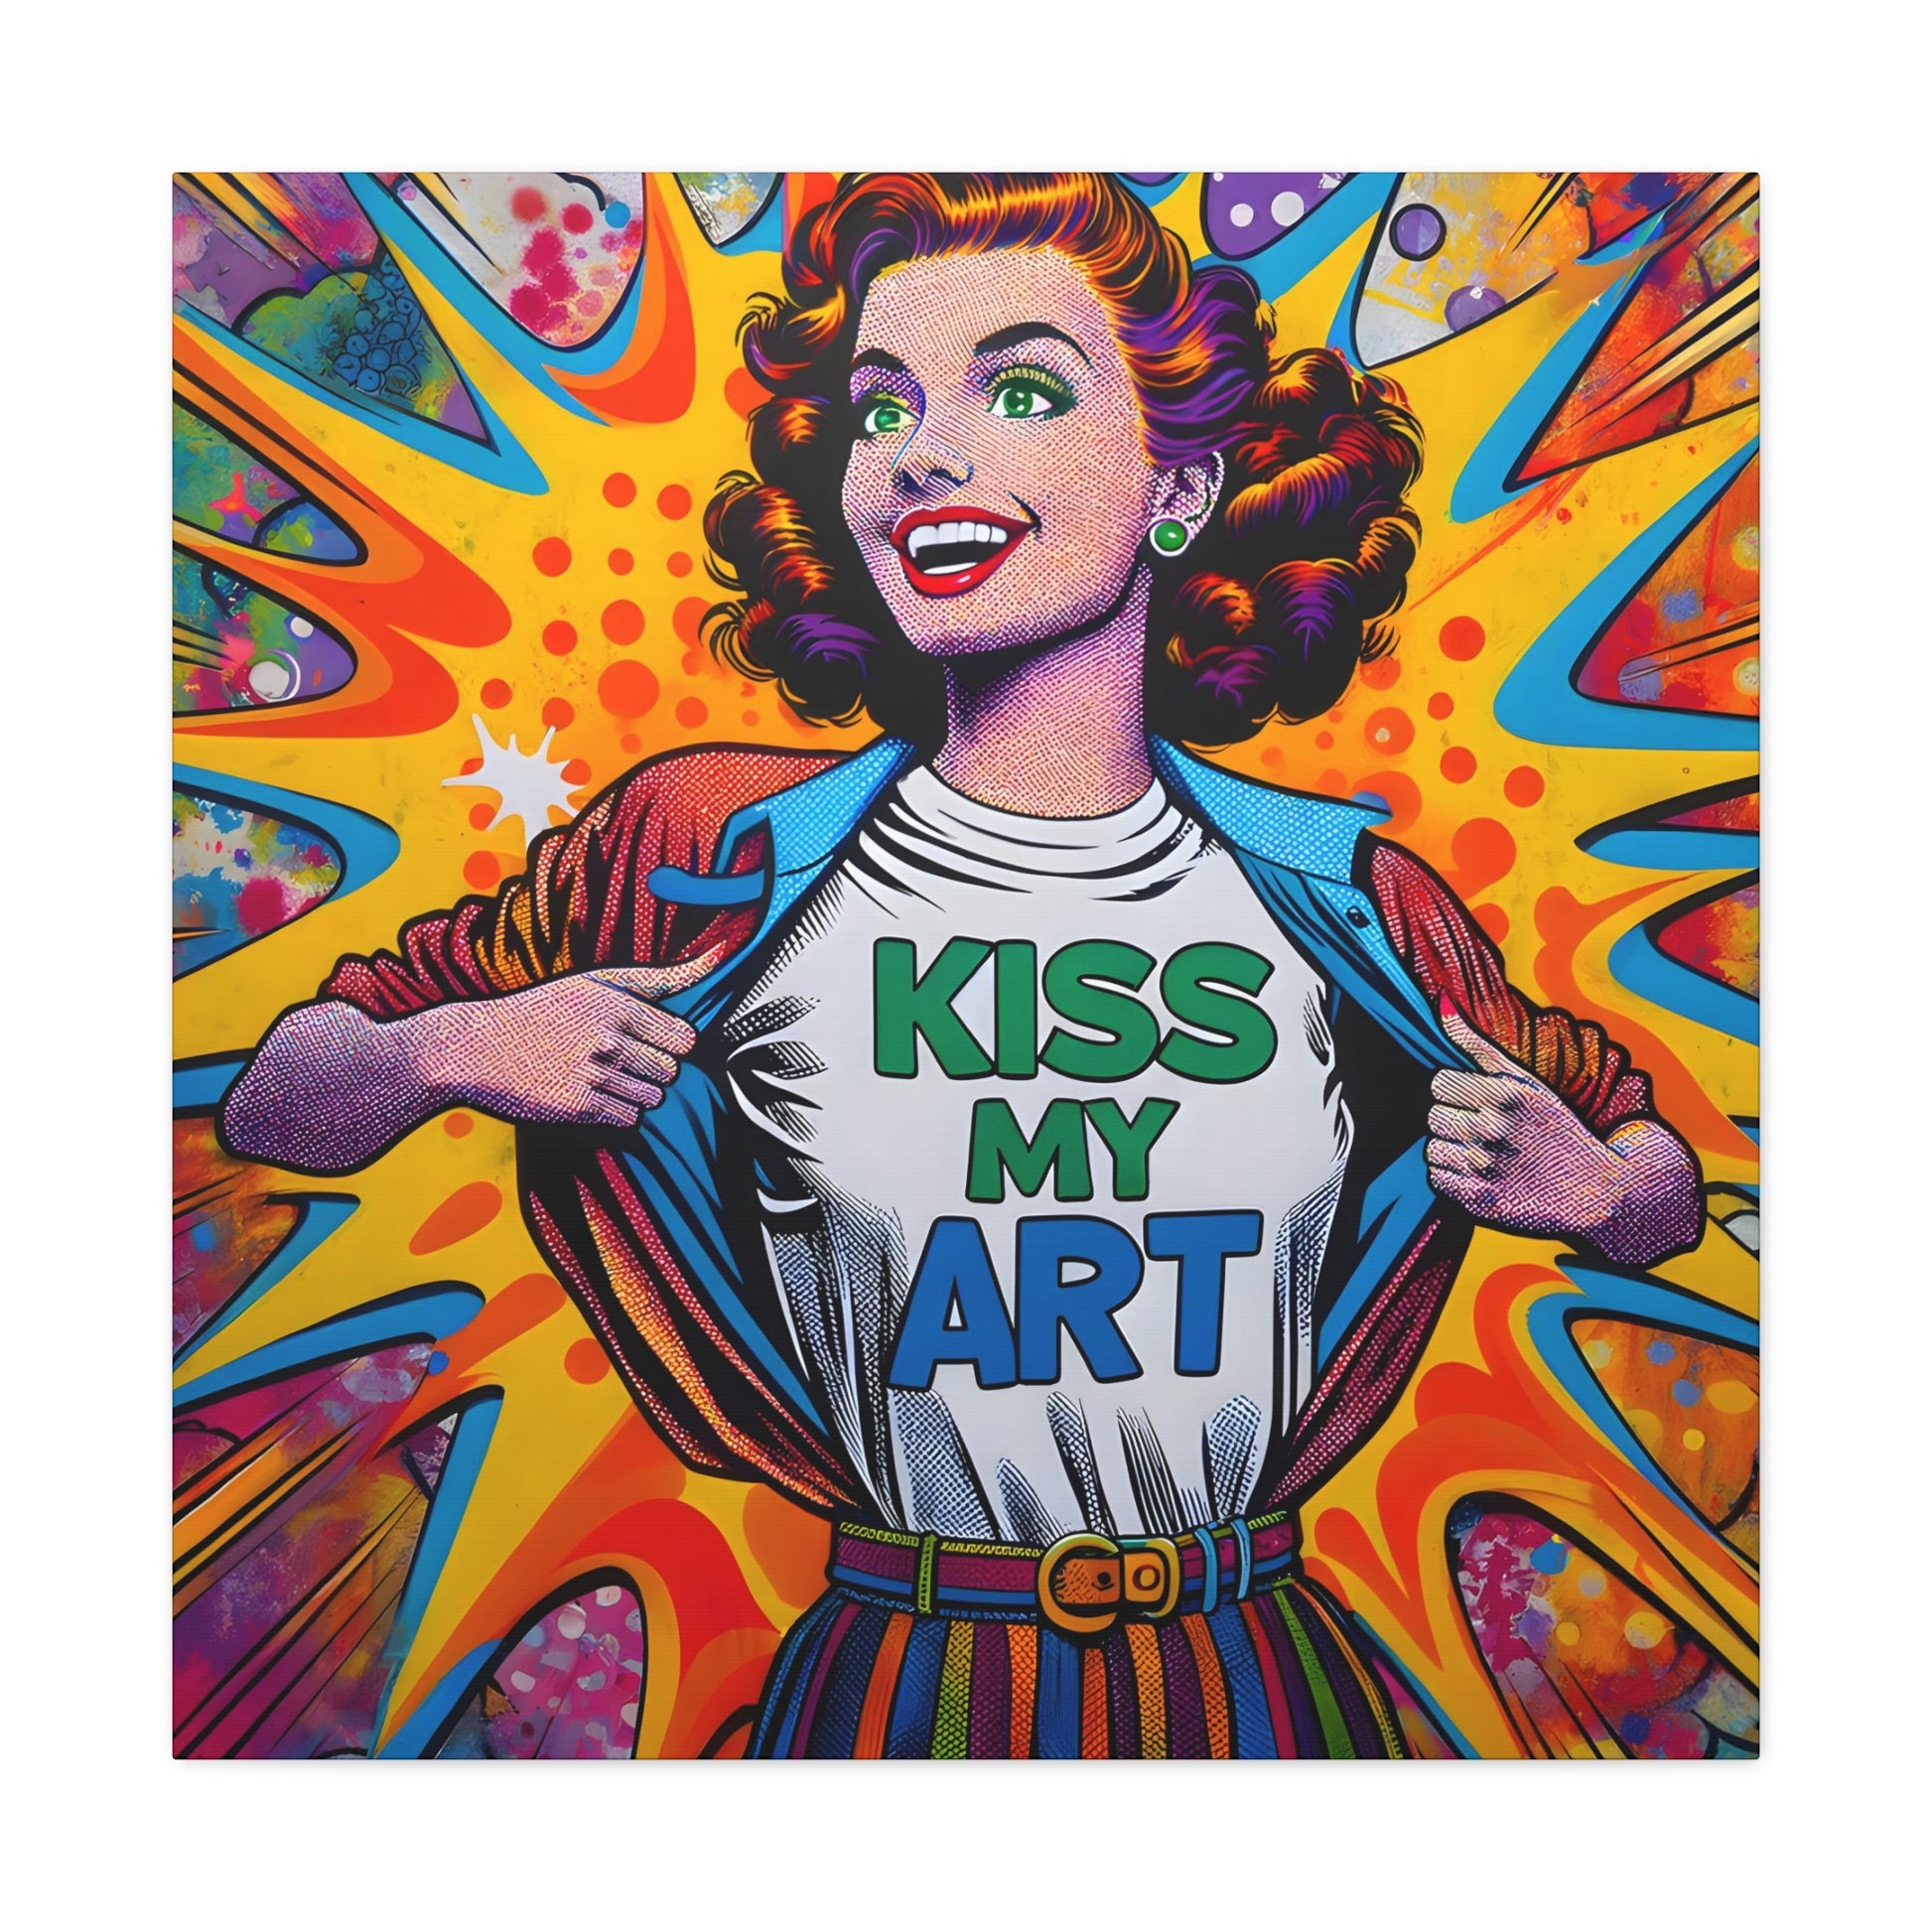 image 3 ‘Chromatic Charm: Kiss My Art’ by Alvin Goldman, a pop art piece inspired by Roy Lichtenstein, featuring a girl with a radiant smile wearing a 'Kiss My Art' tee, embodying the movement's playful essence and bold colors, ideal for art enthusiasts looking to add a burst of color and pop culture to their space."